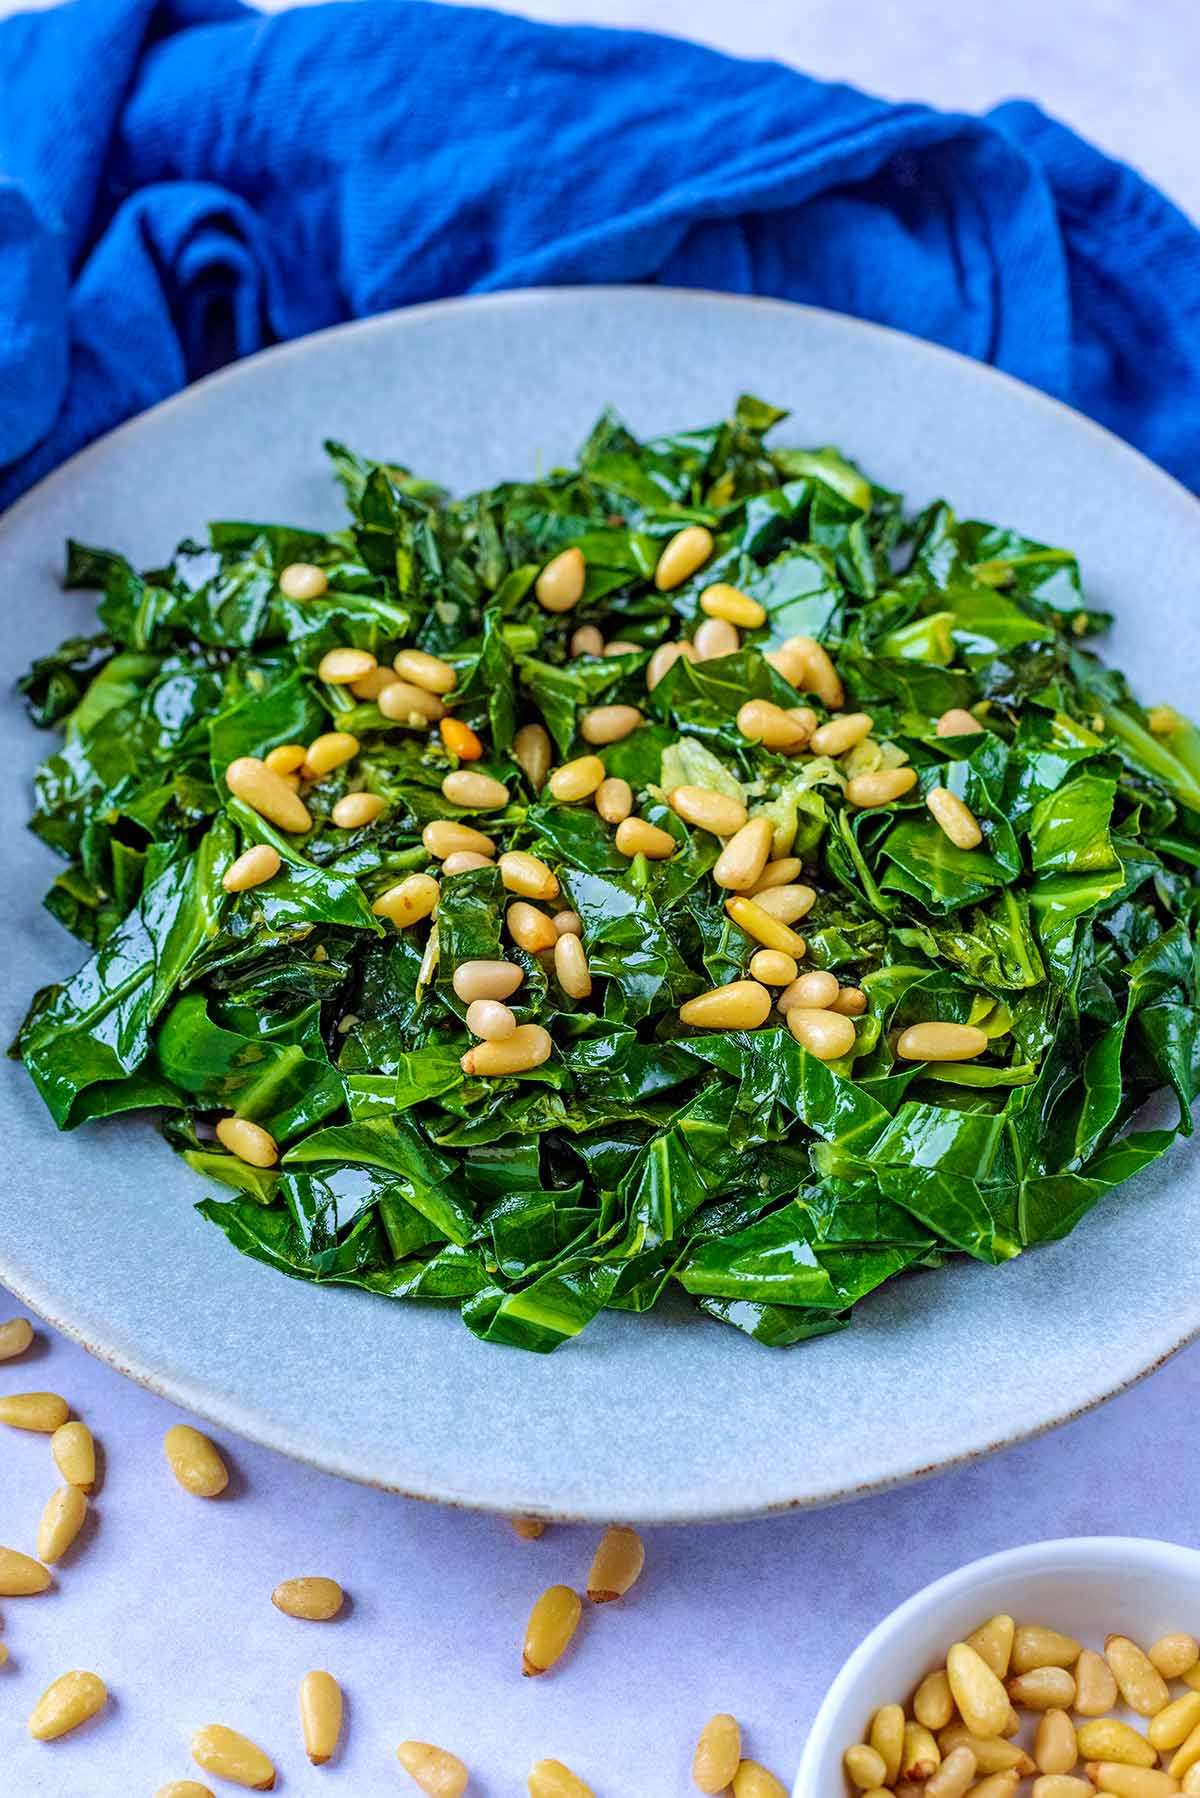 A plate of cooked spring greens in front of a blue towel.